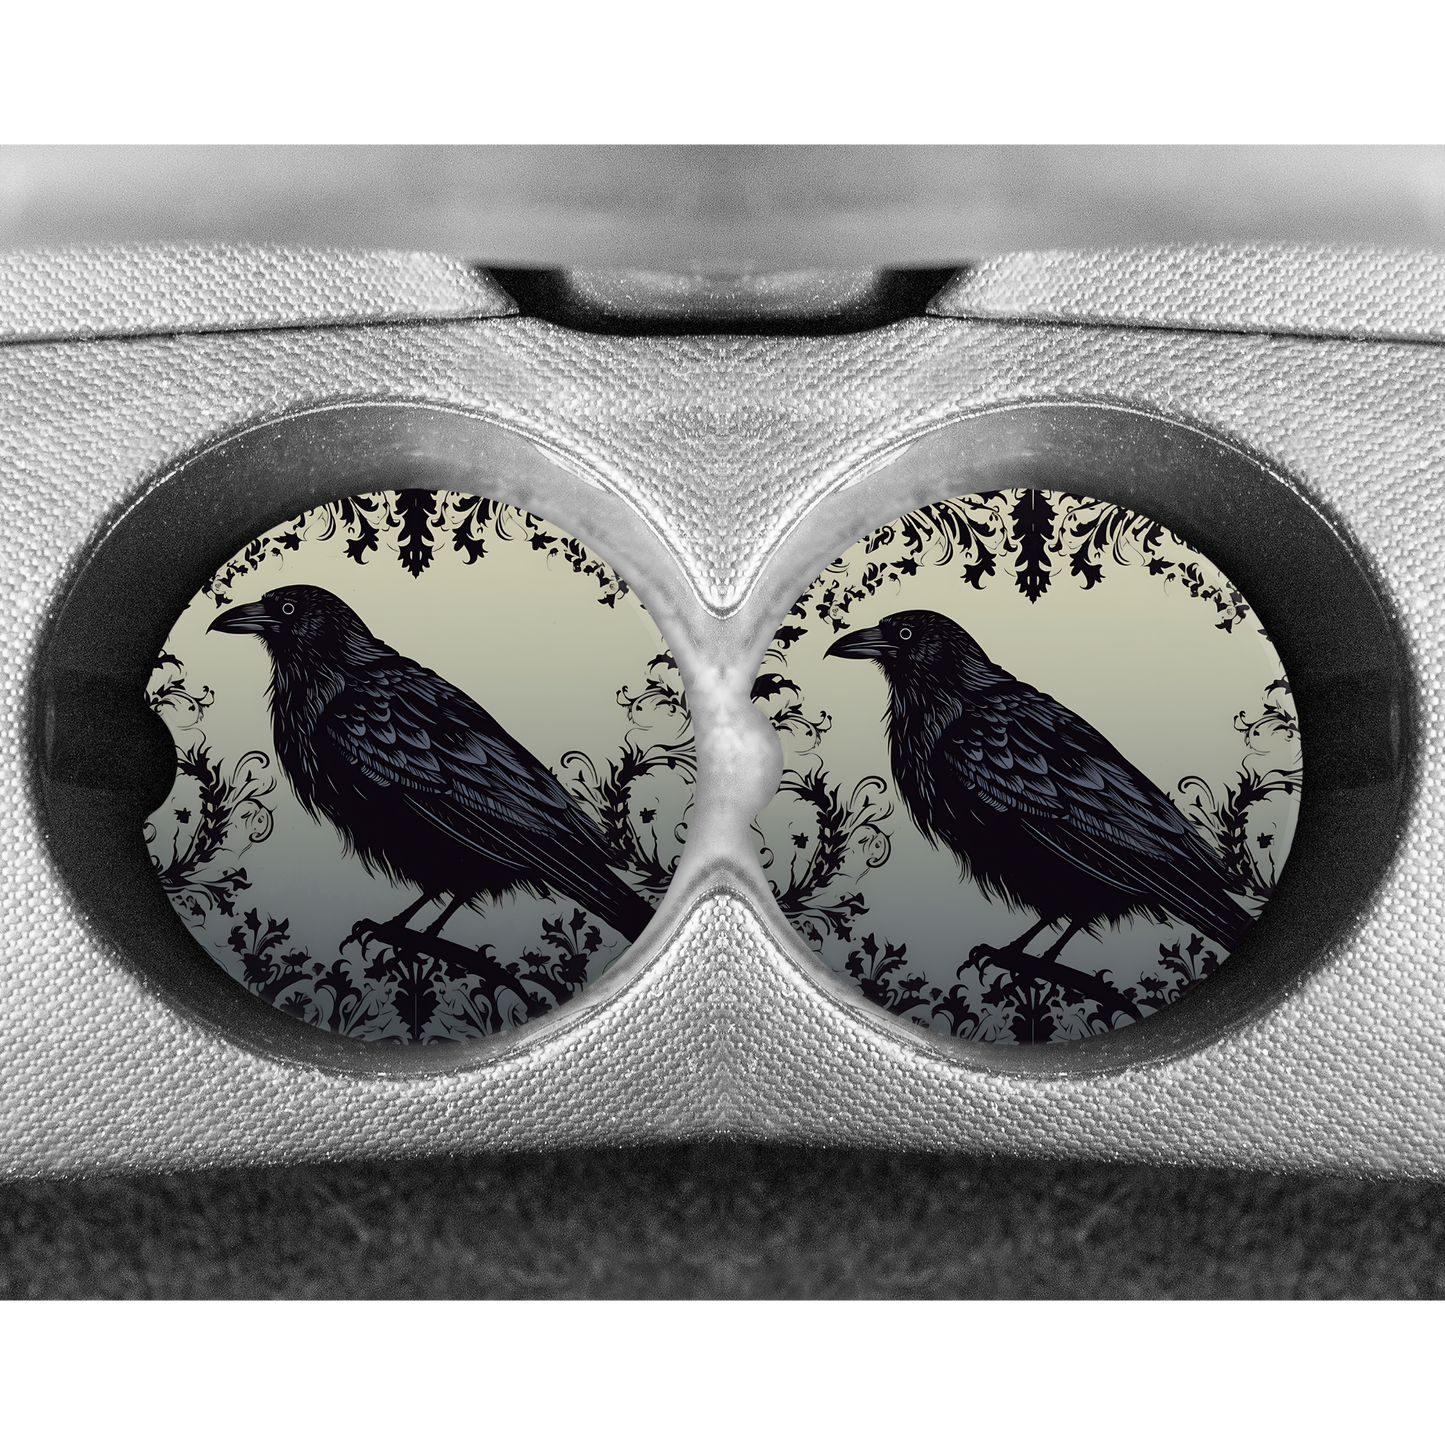 Premium Neoprene Car Coasters | Drink Holders for Your Car Console - Set of 2 Broody Raven Design